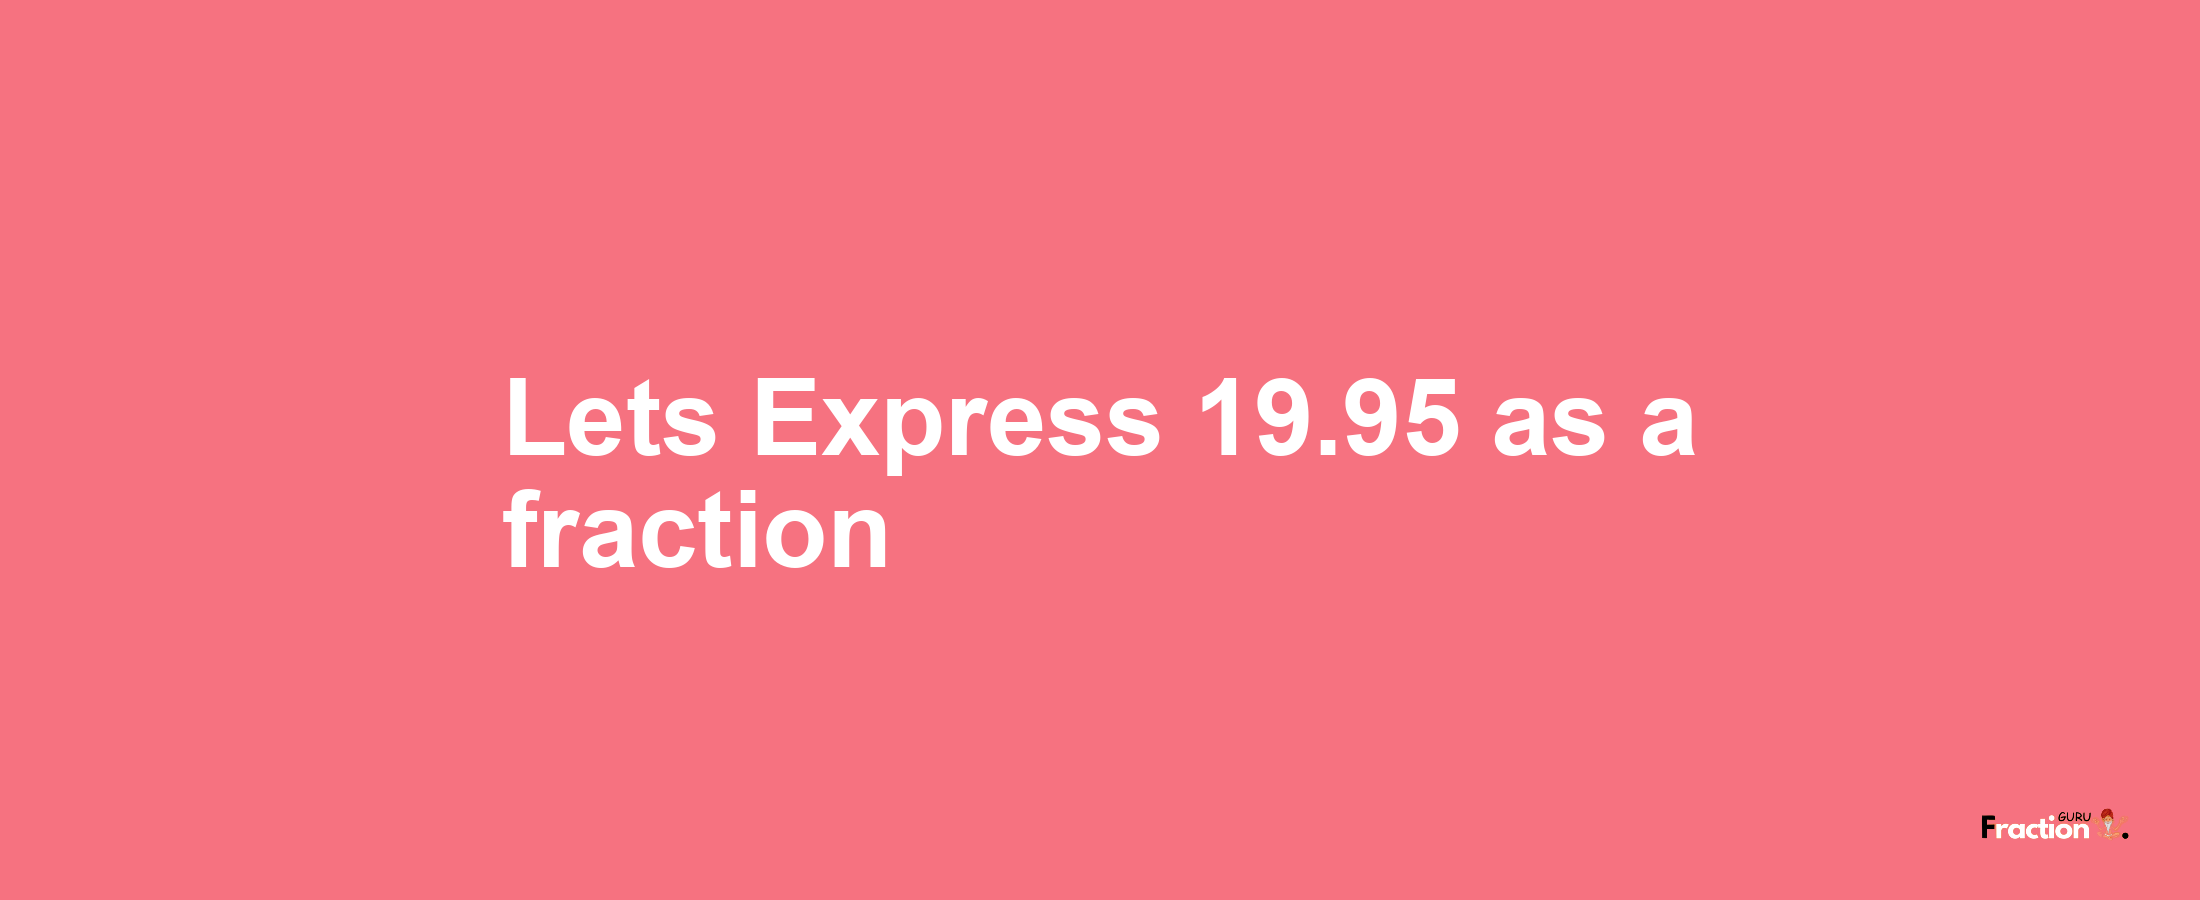 Lets Express 19.95 as afraction